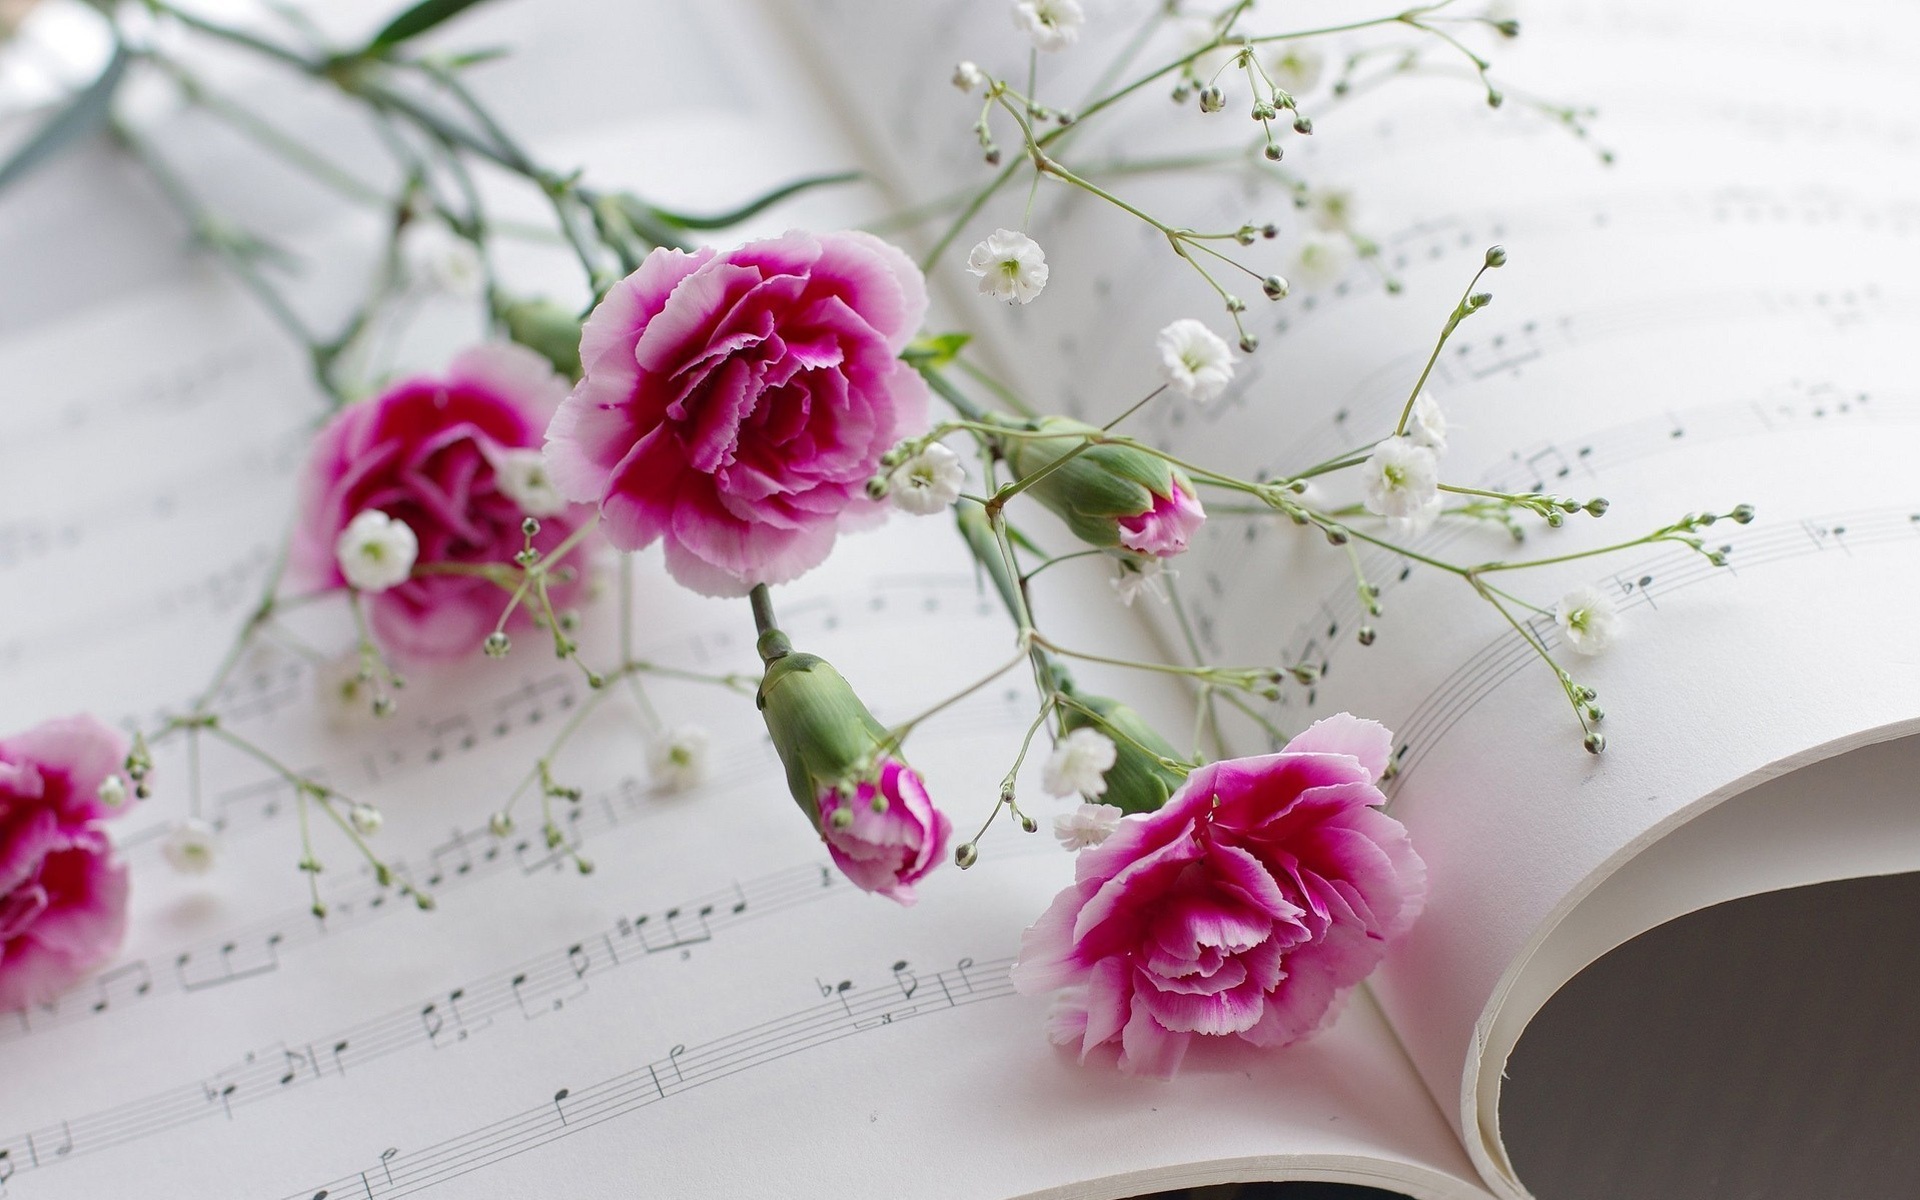 Carnations-flowers-book-musical-scores_1920x1200